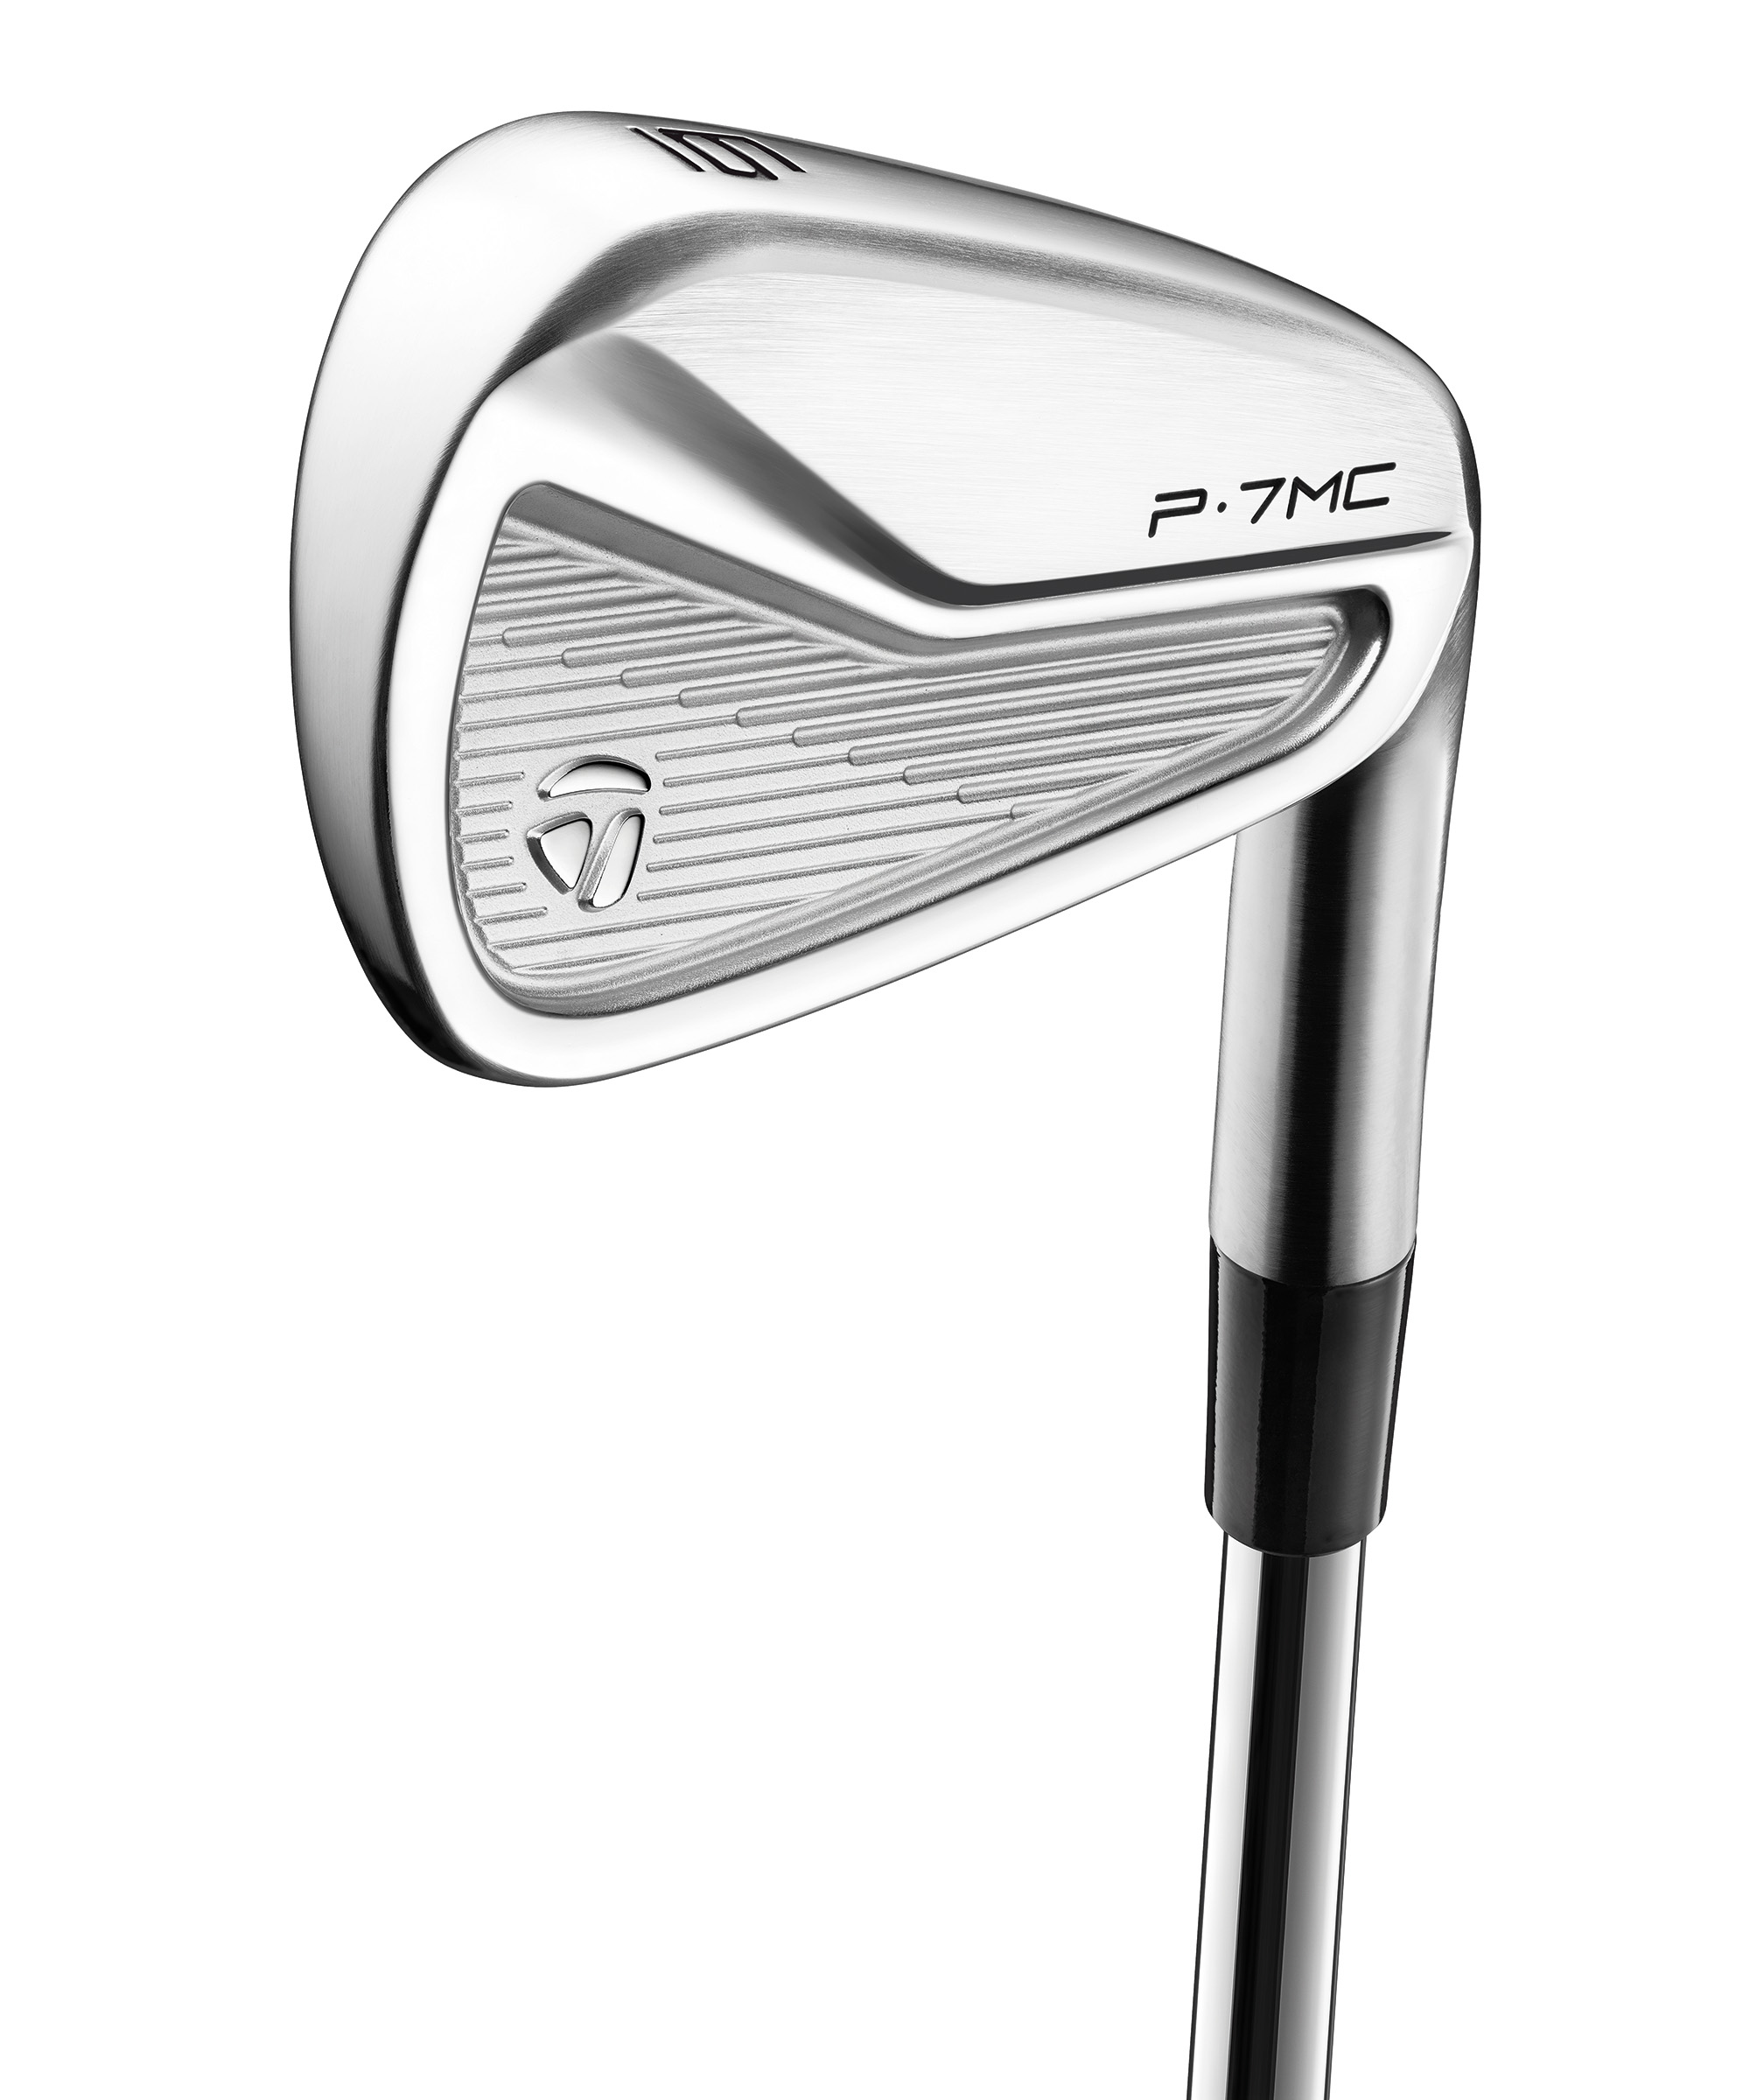 TaylorMade Golf expand P-700 Series irons with P-770, P-7CB and P-7MB ...